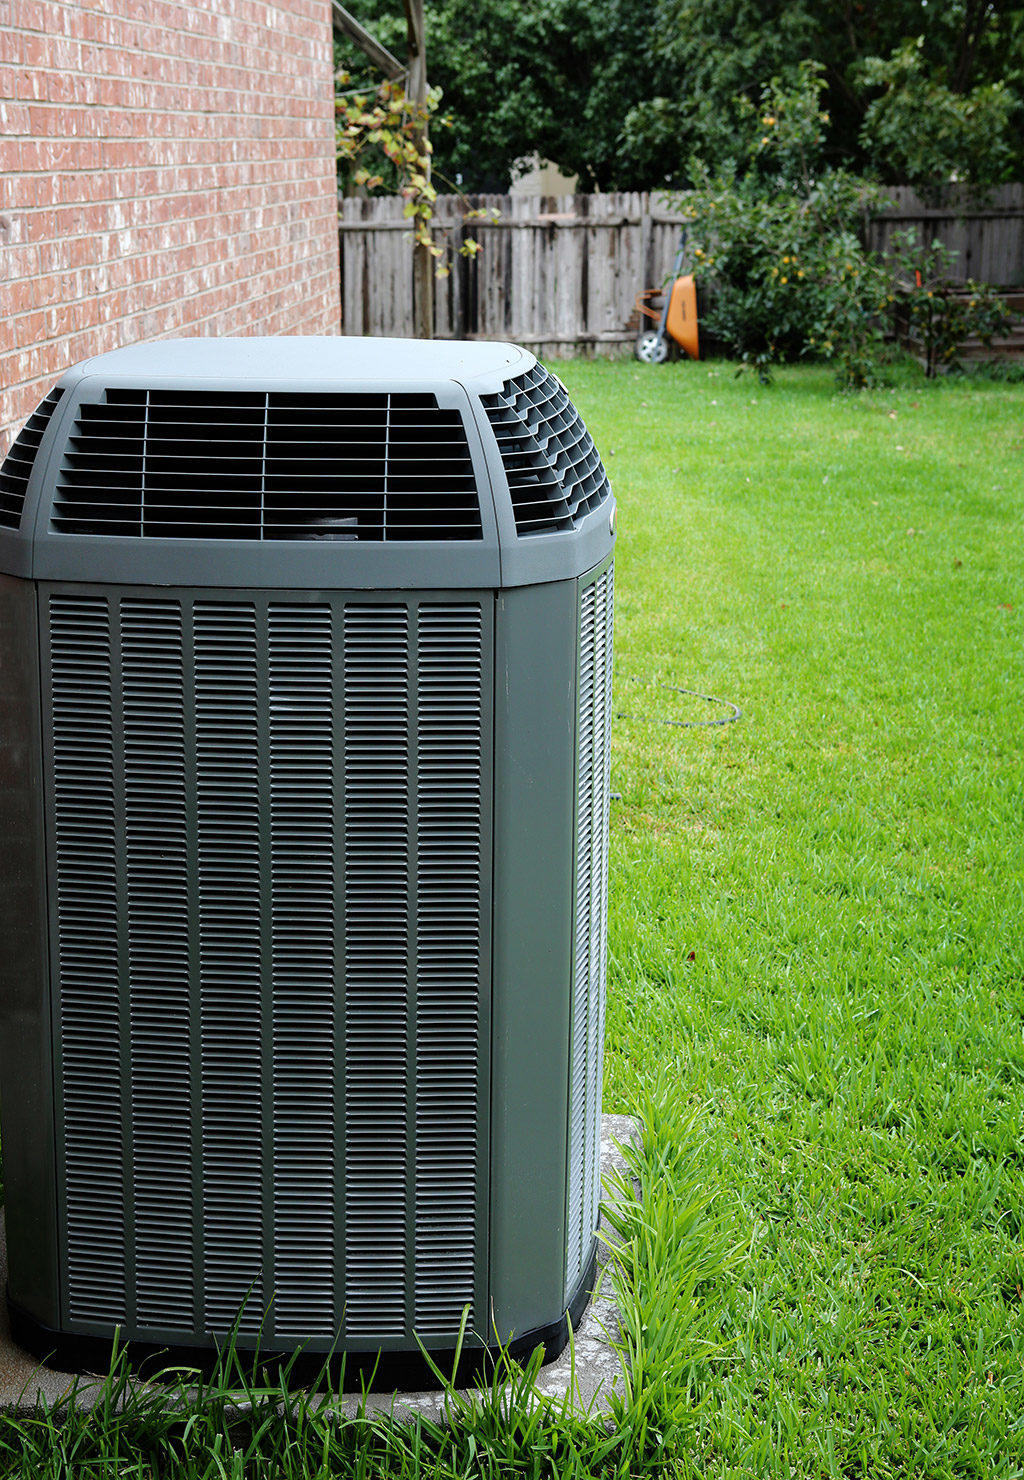 Reasons Why You Need to Hire a Professional for an AC Installation | Heating and Air Conditioning Repair in Frisco, TX